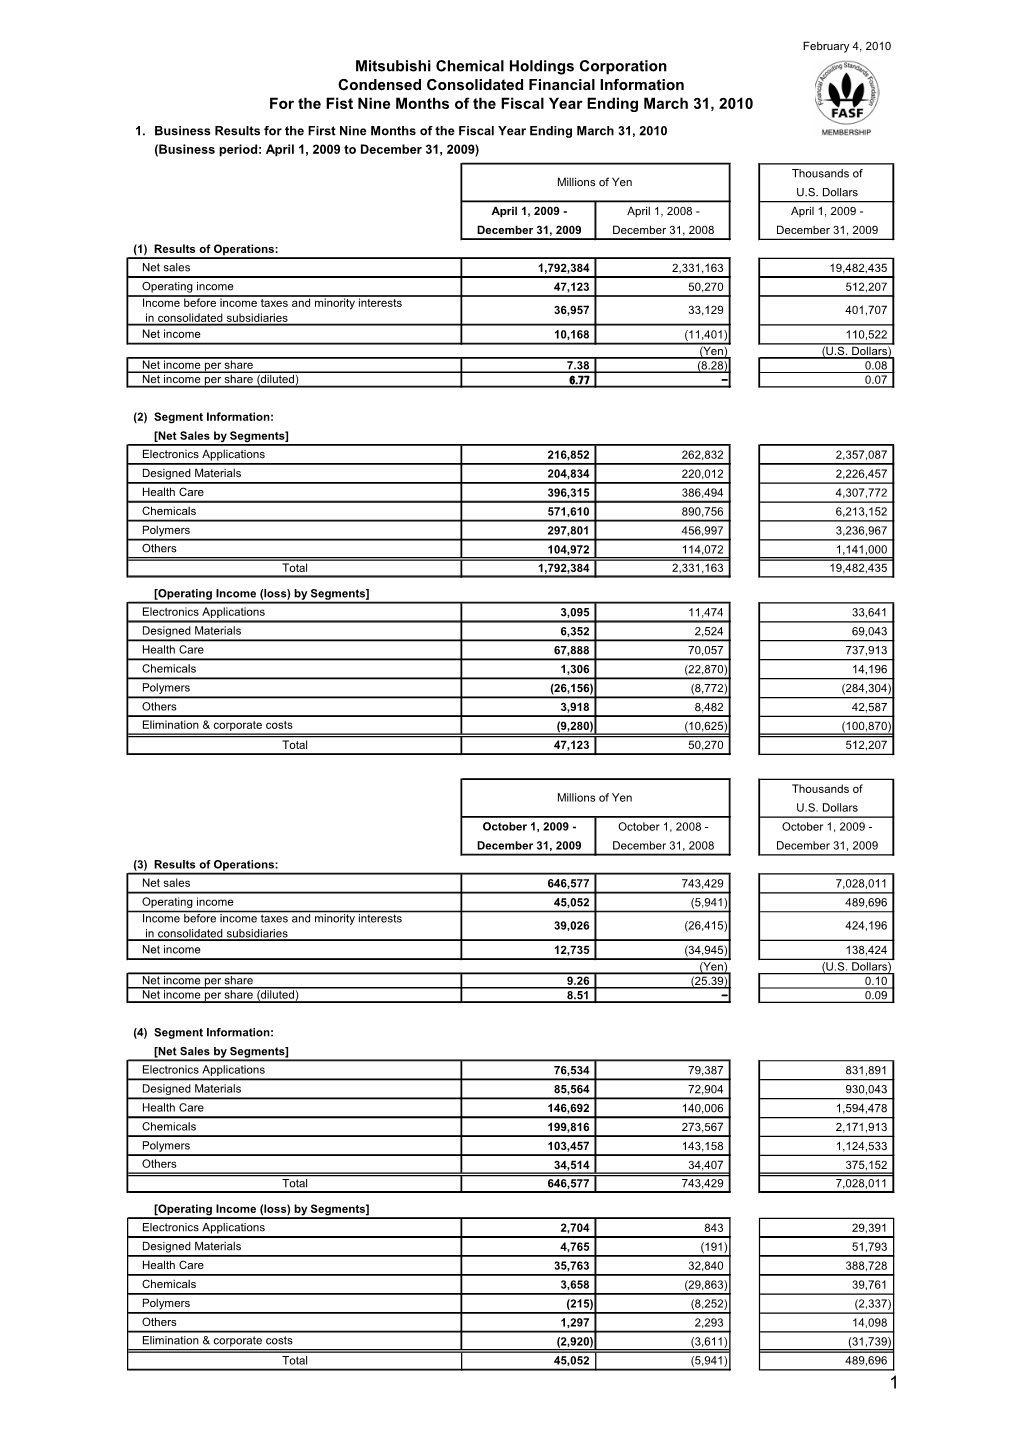 Mitsubishi Chemical Holdings Corporation Condensed Consolidated Financial Information for the Fist Nine Months of the Fiscal Year Ending March 31, 2010